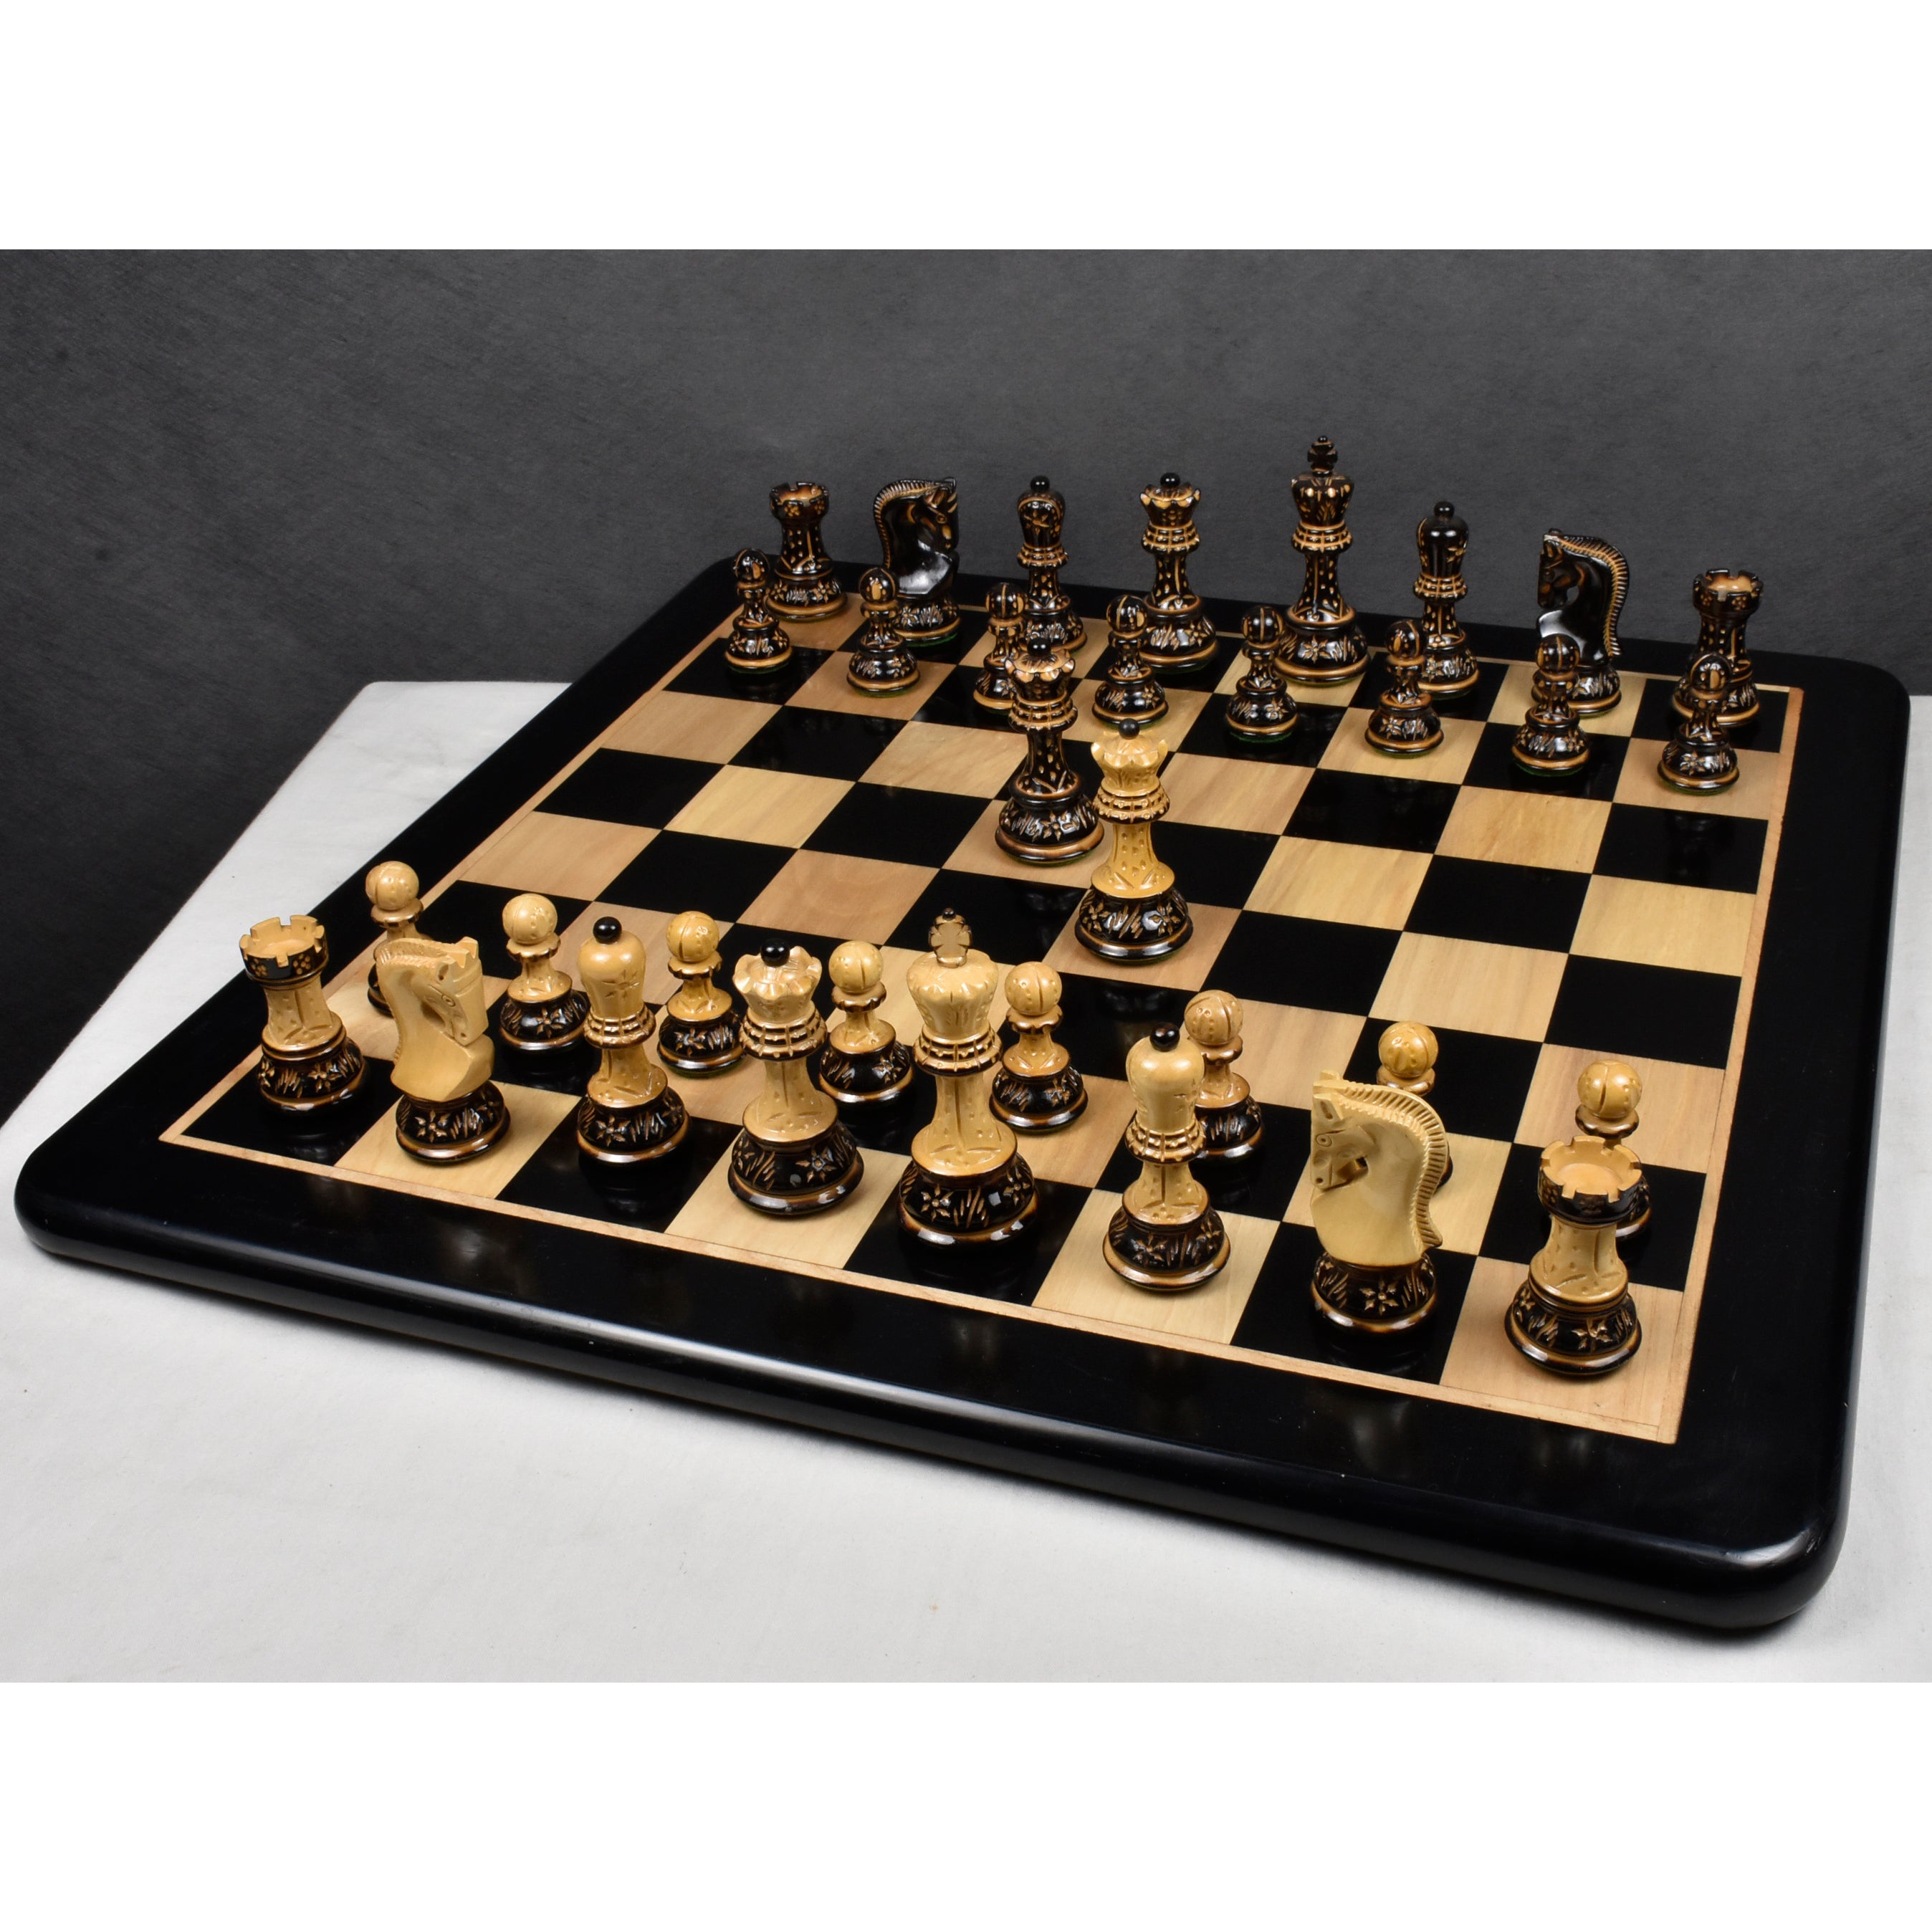 3.75" Artisan Carving Burnt Zagreb Chess Set- Chess Pieces Only - Weighted Box wood